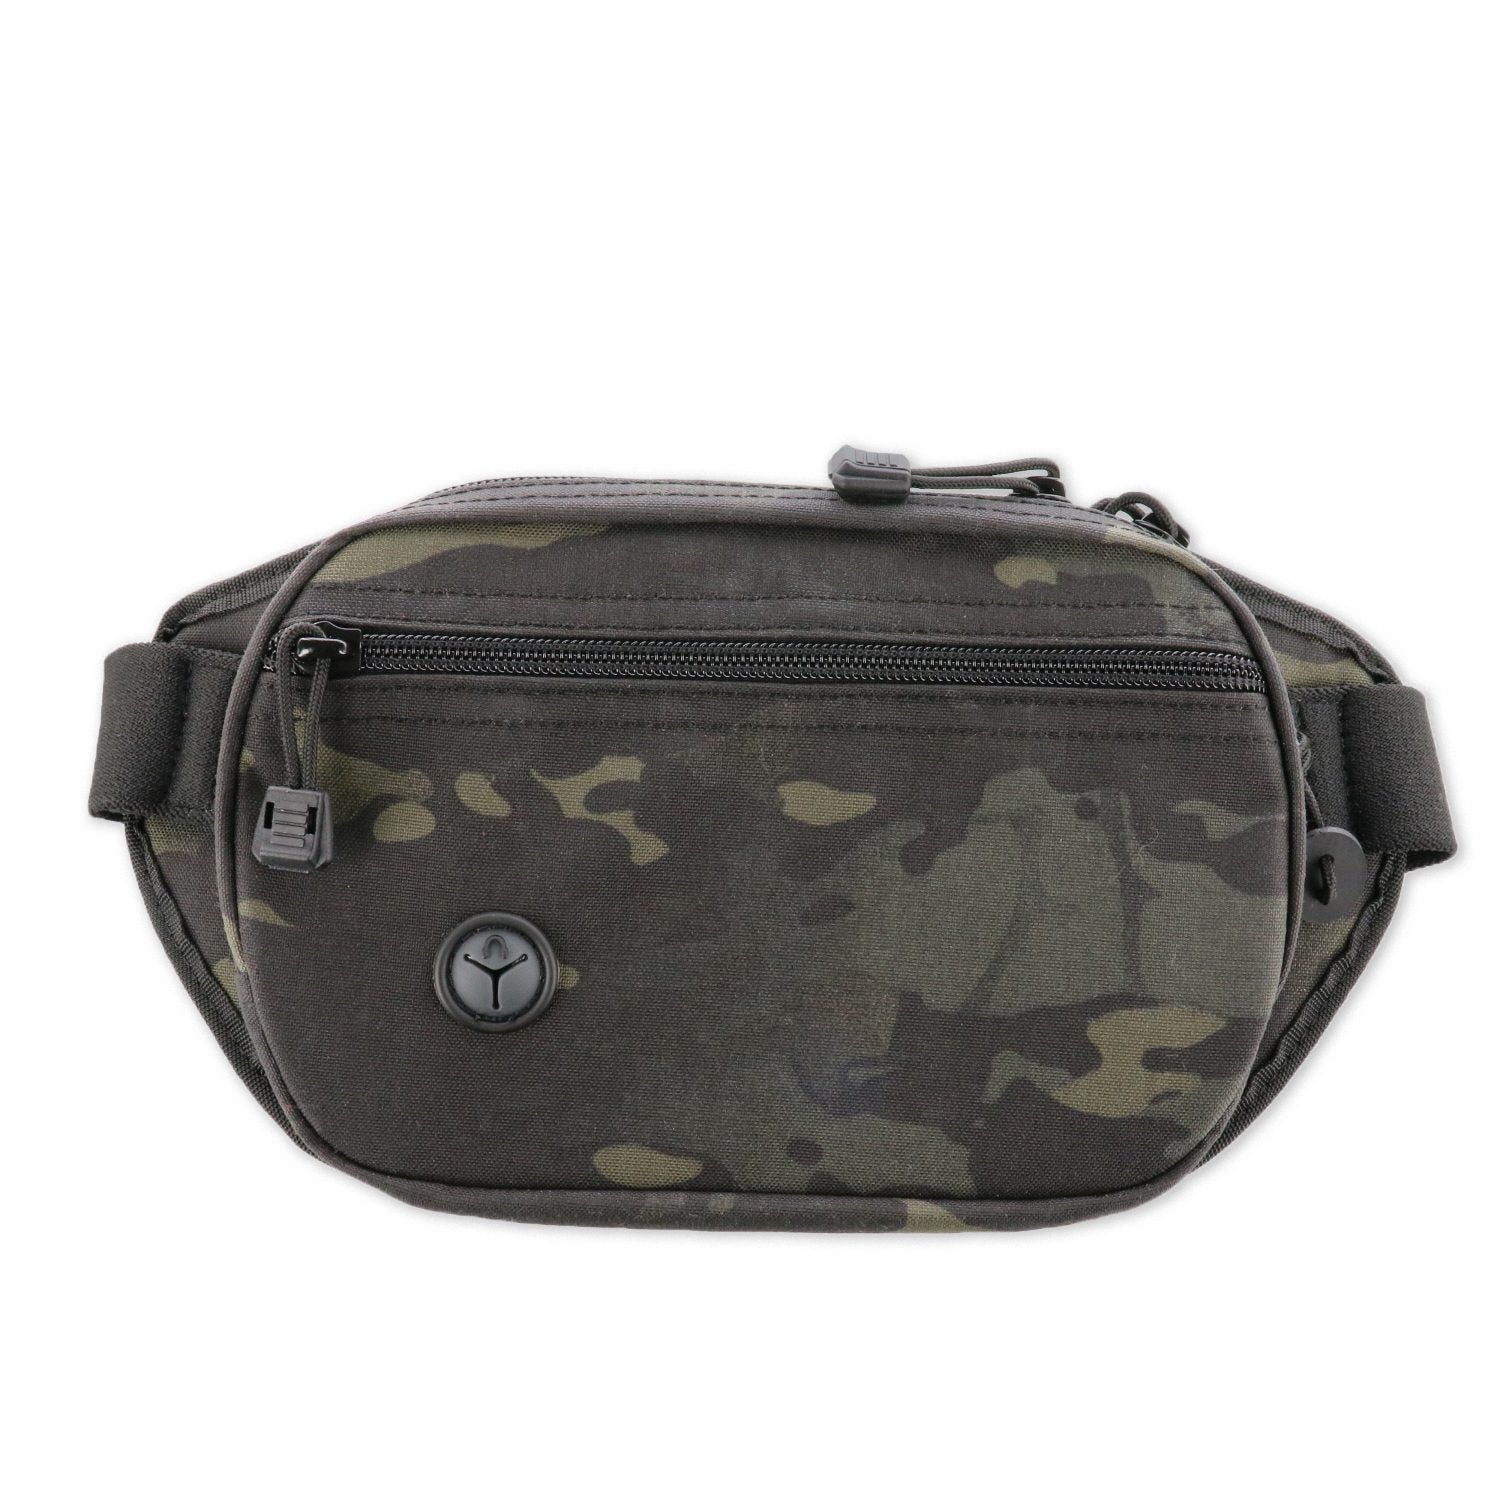 Galco Gunleather Fastrax Pac Waistpack - Tactical & Duty Gear